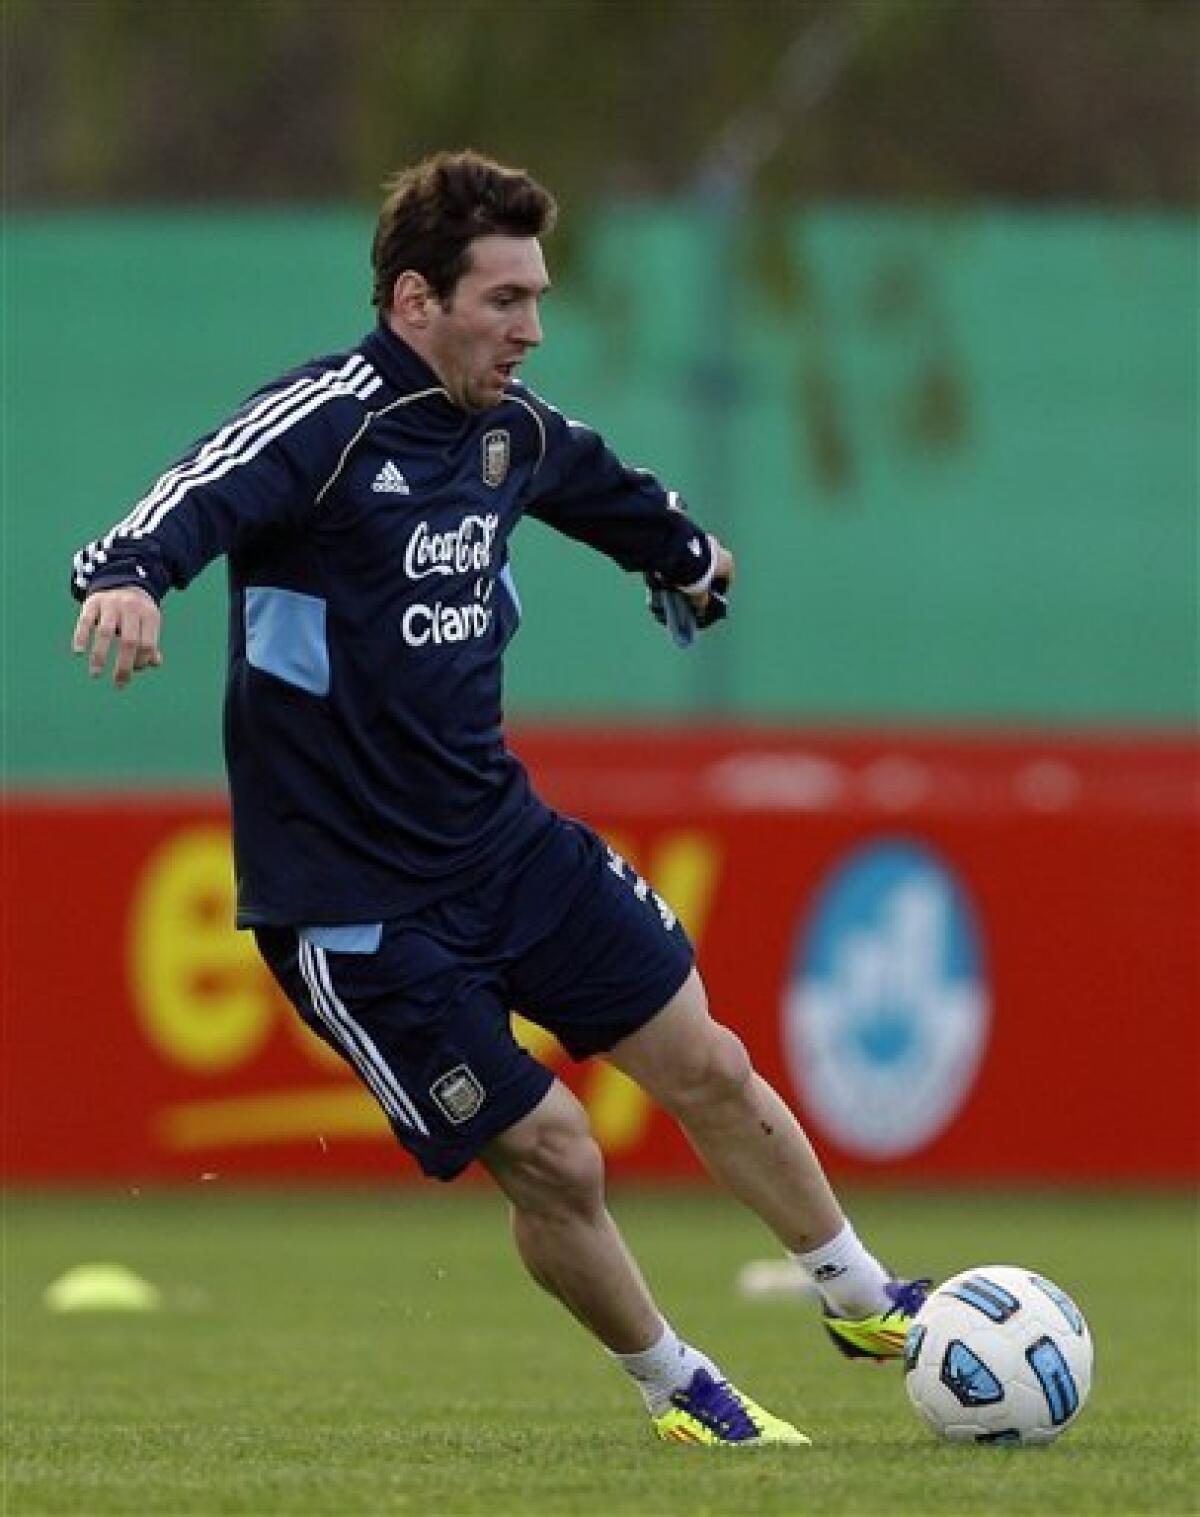 Argentina's Lionel Messi controls the ball during a training session ahead the Copa America in Buenos Aires, Argentina, Thursday, June 23, 2011. Argentina will host the Copa America soccer tournament from July 1 to July 24. (AP Photo/Eduardo Di Baia)